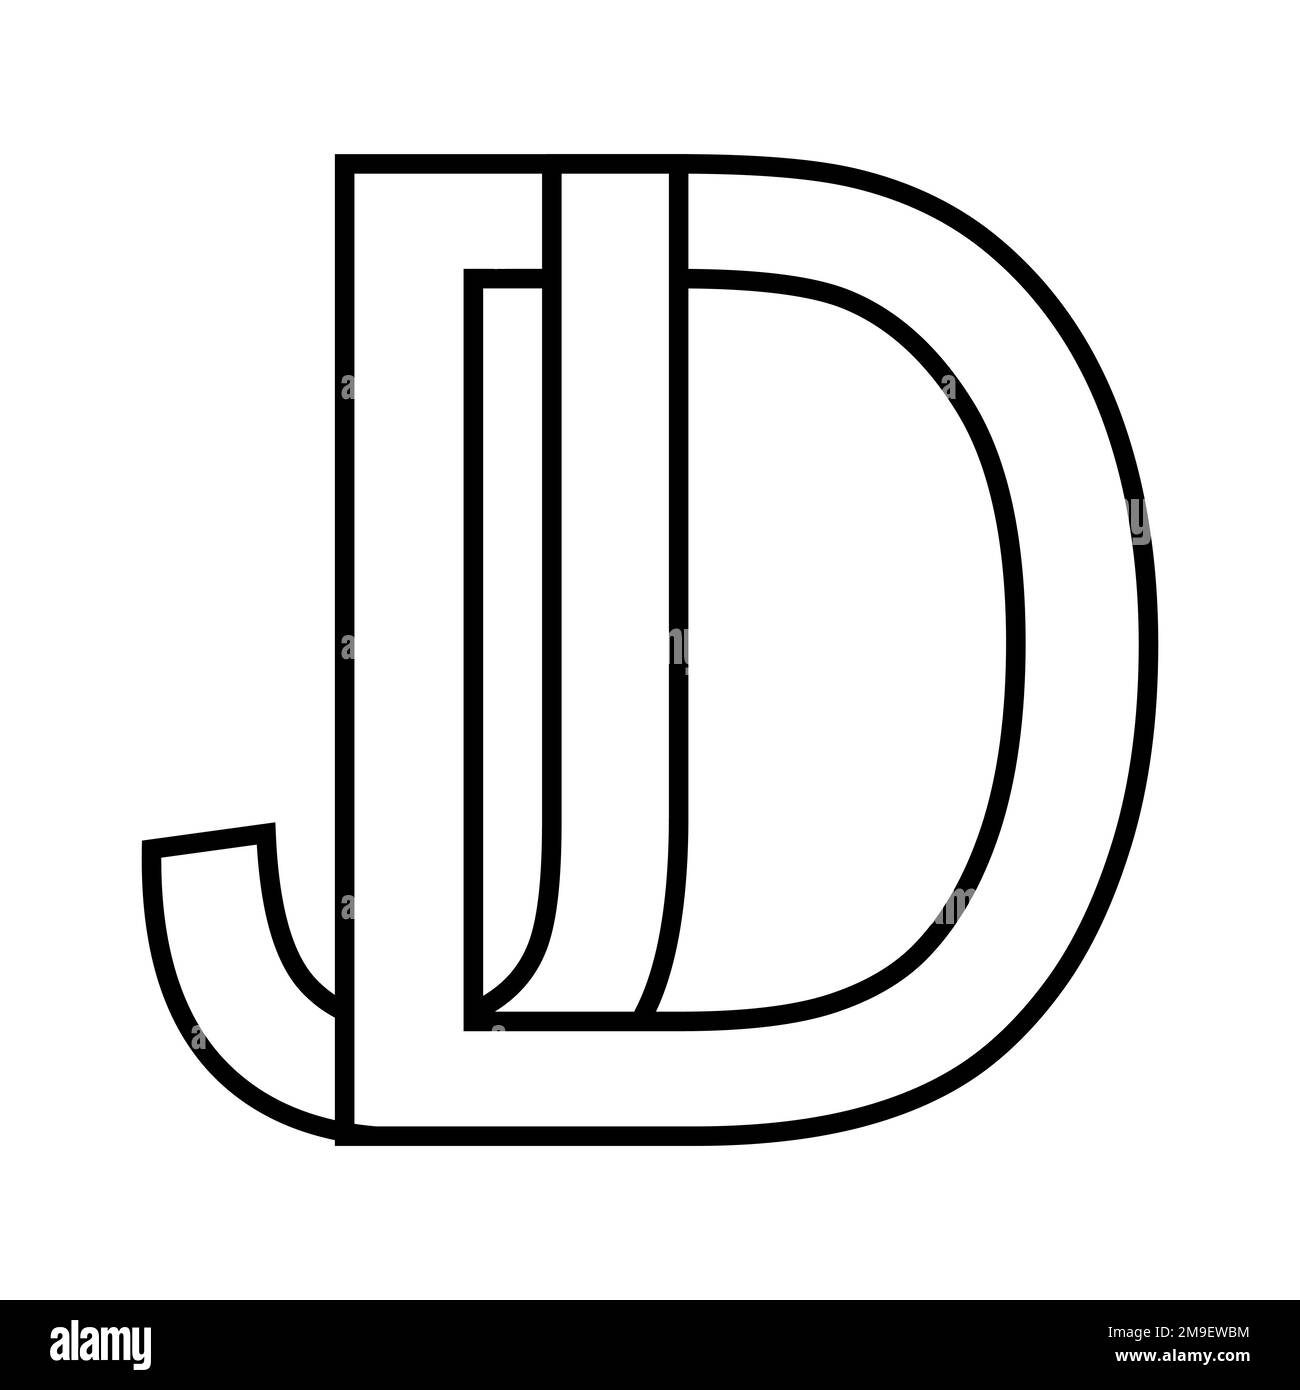 Logo sign dj jd icon double letters logotype d j Stock Vector